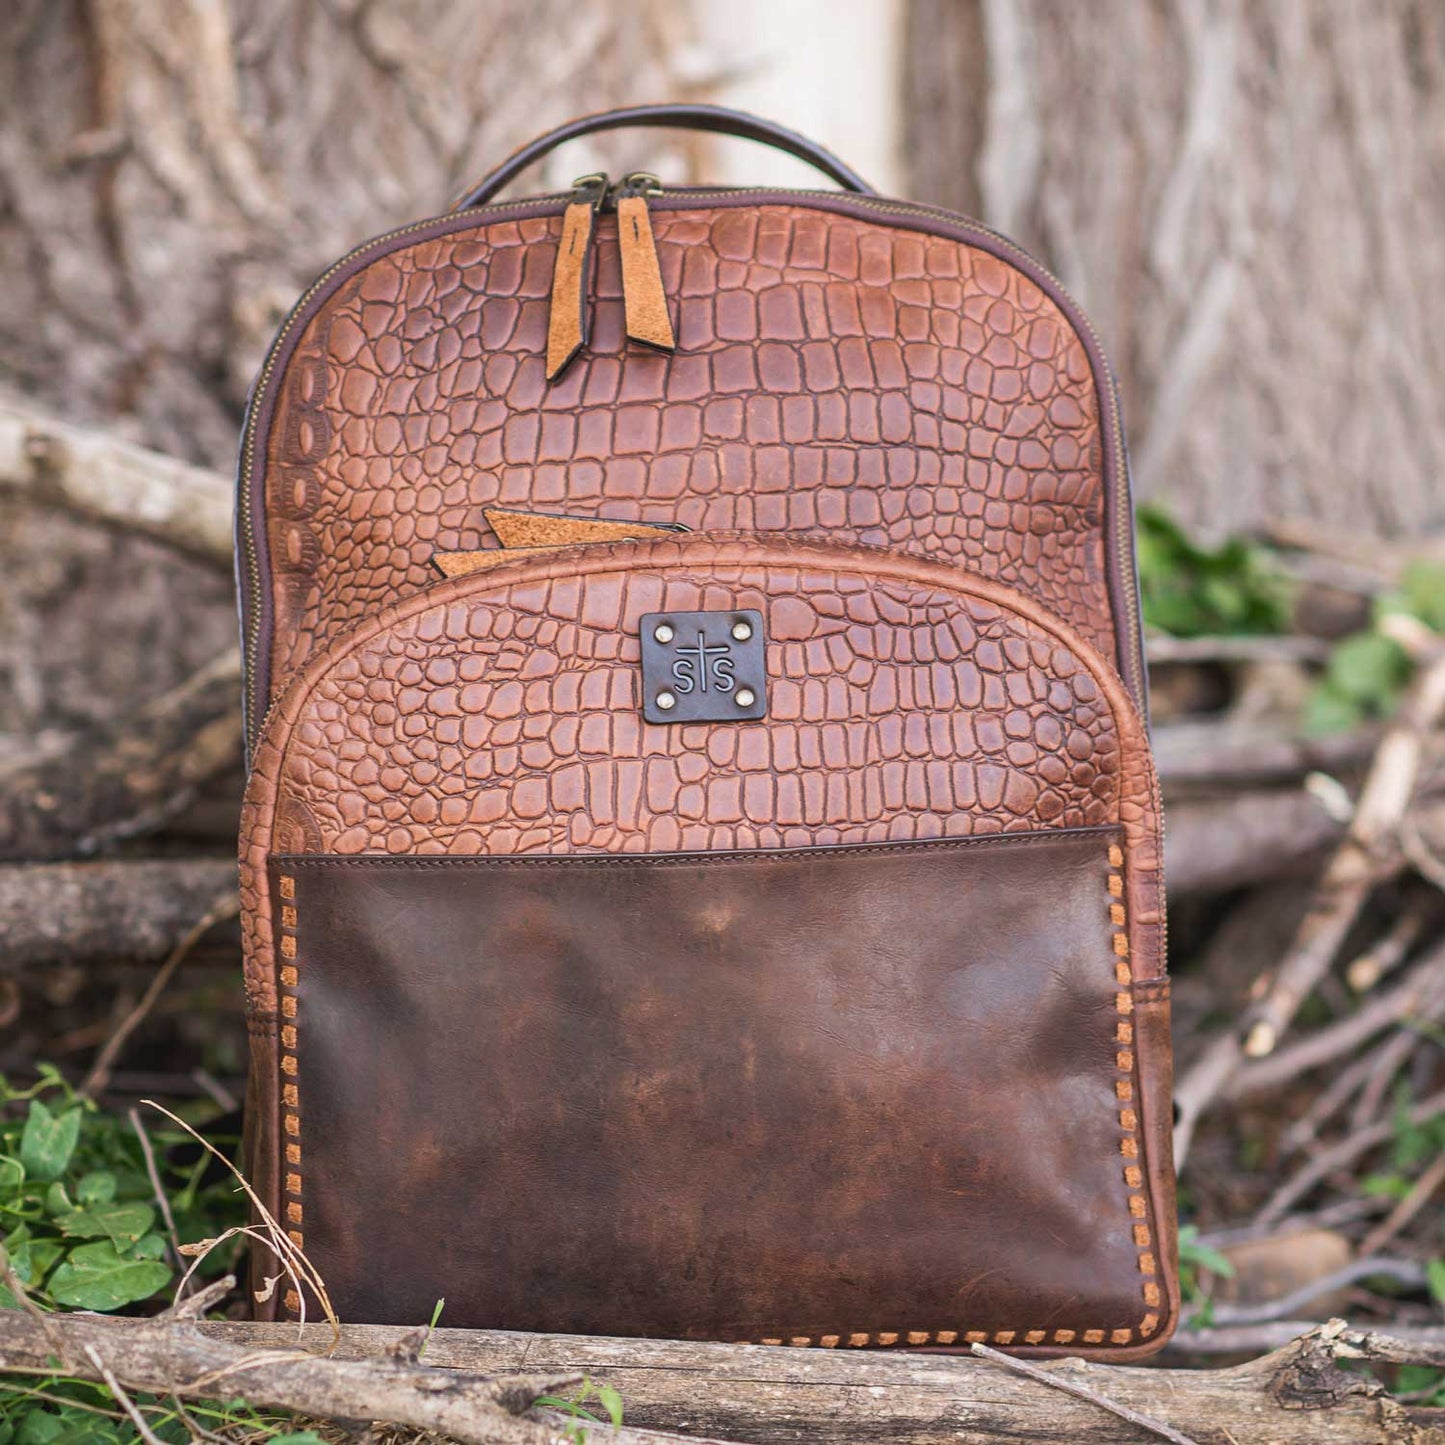 STS Ranchwear Catalina Croc Mini Backpack in Brown